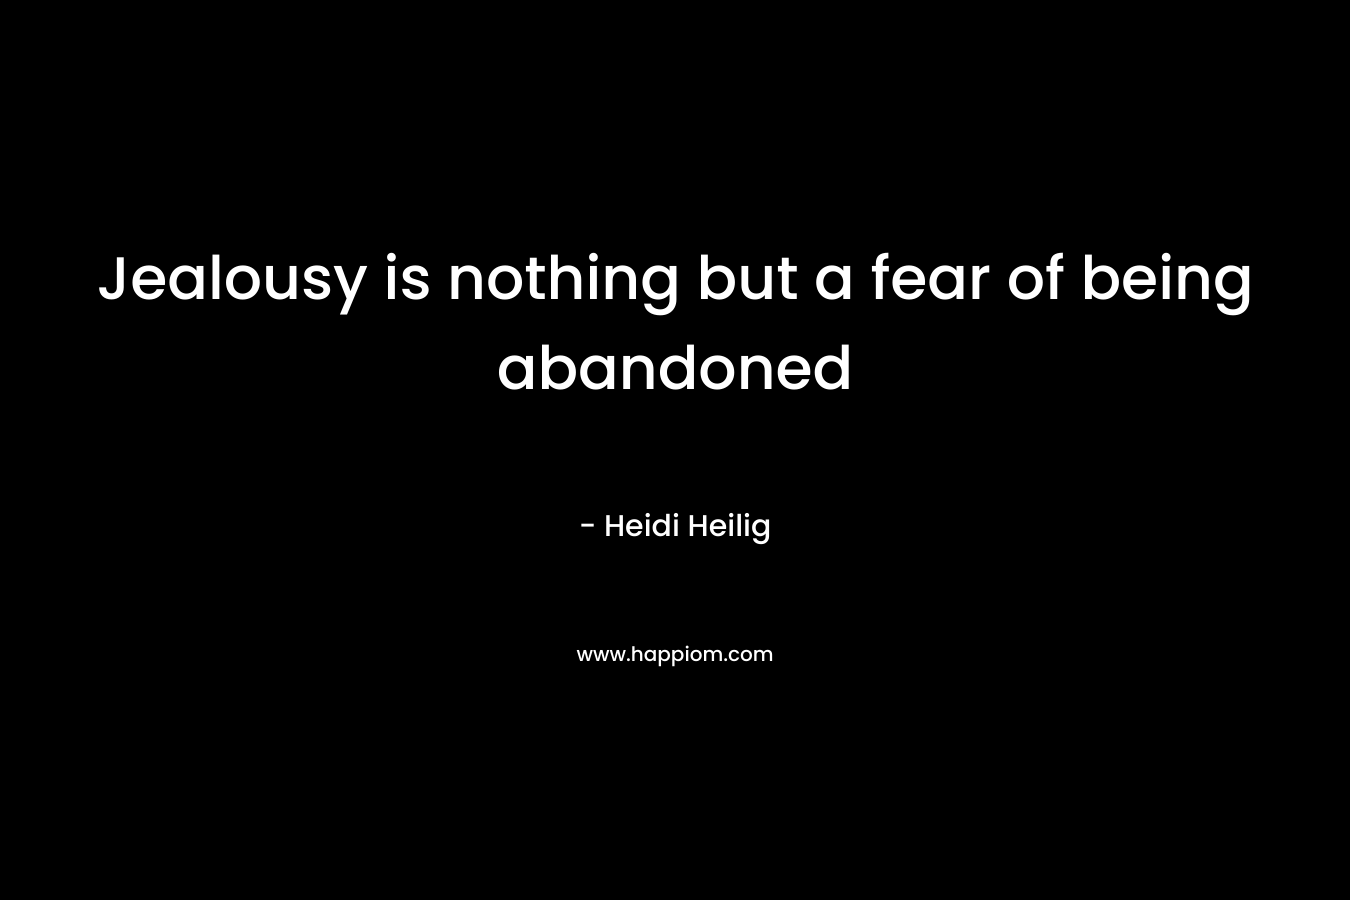 Jealousy is nothing but a fear of being abandoned – Heidi Heilig